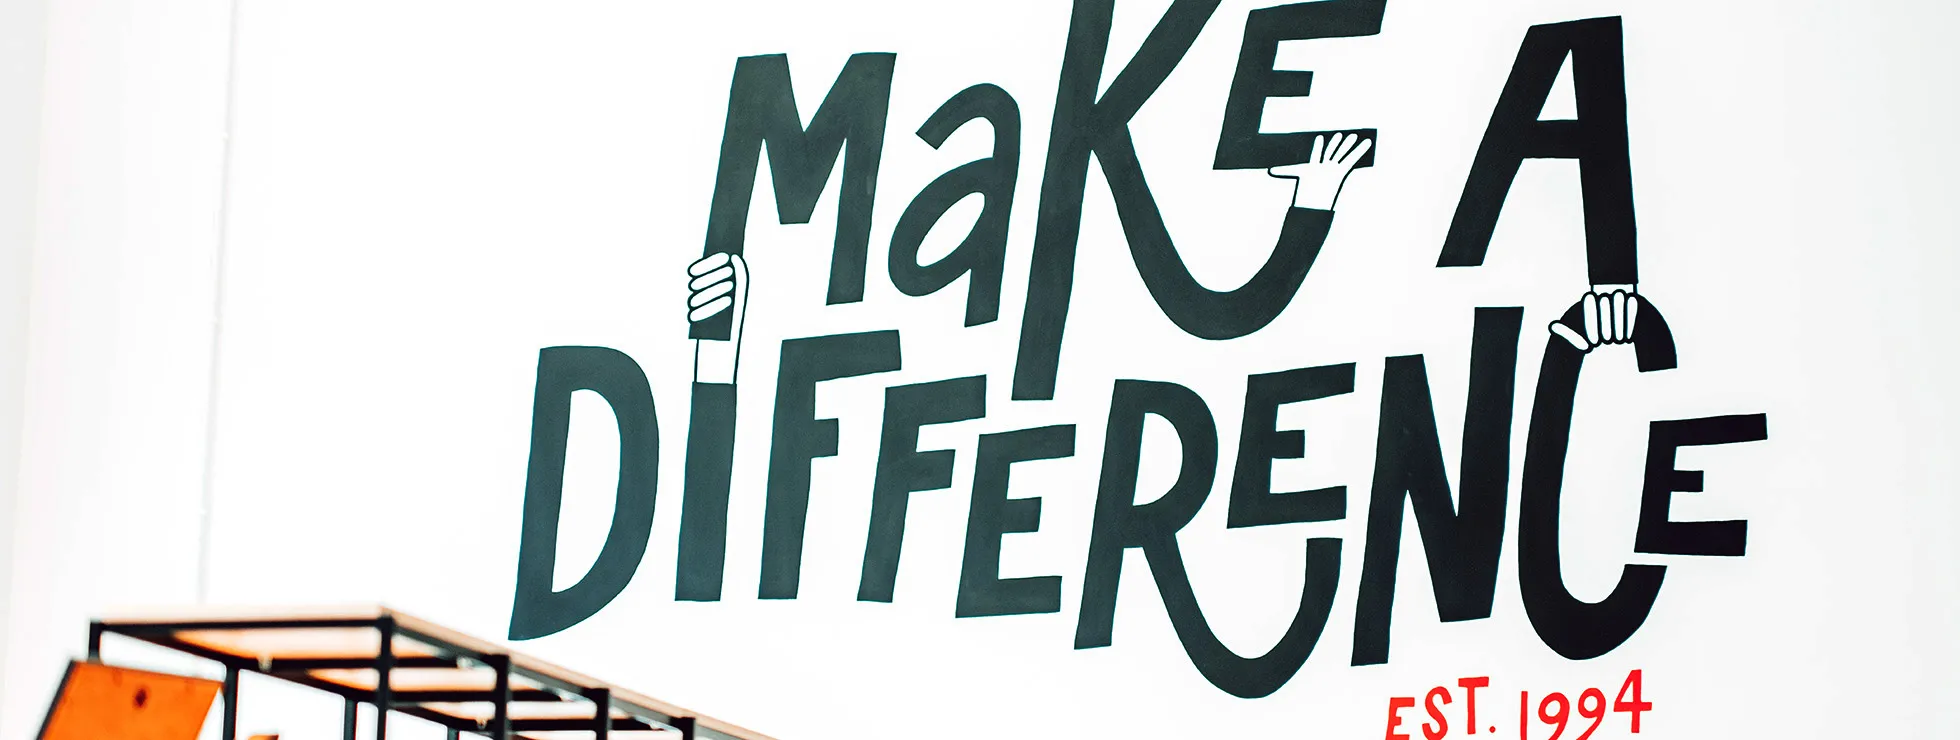 IE's "Make a Difference" mural on the wall of the studio in Birmingham's Jewellery Quarter